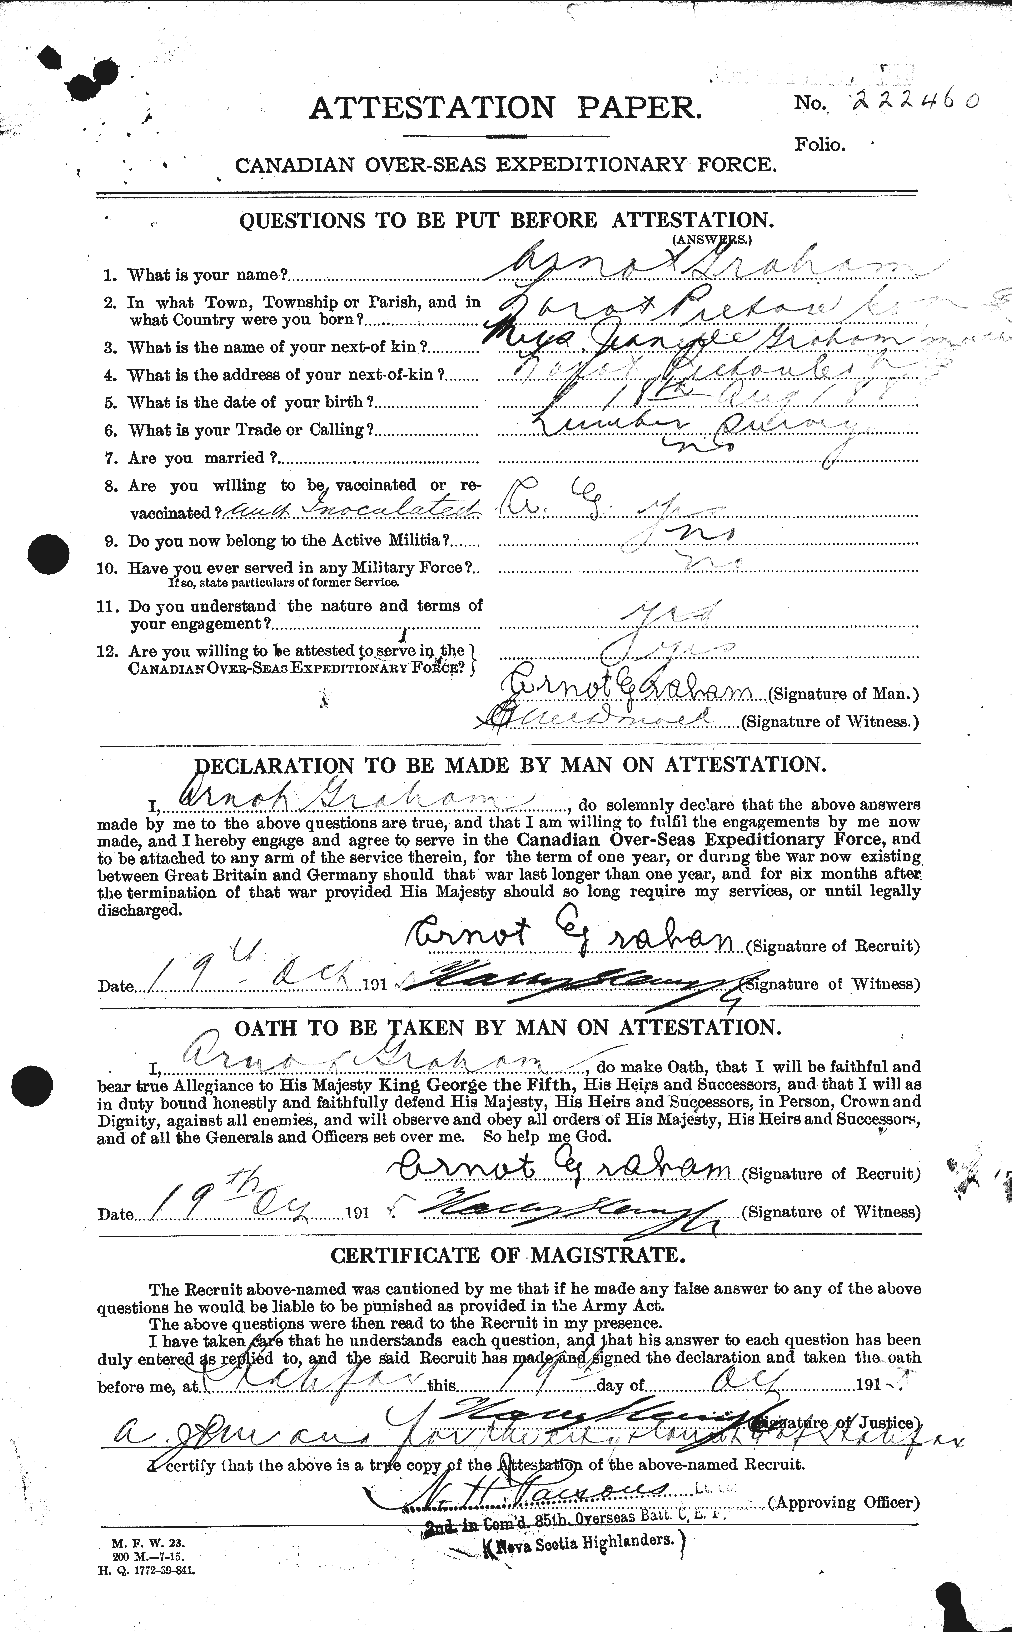 Personnel Records of the First World War - CEF 359646a